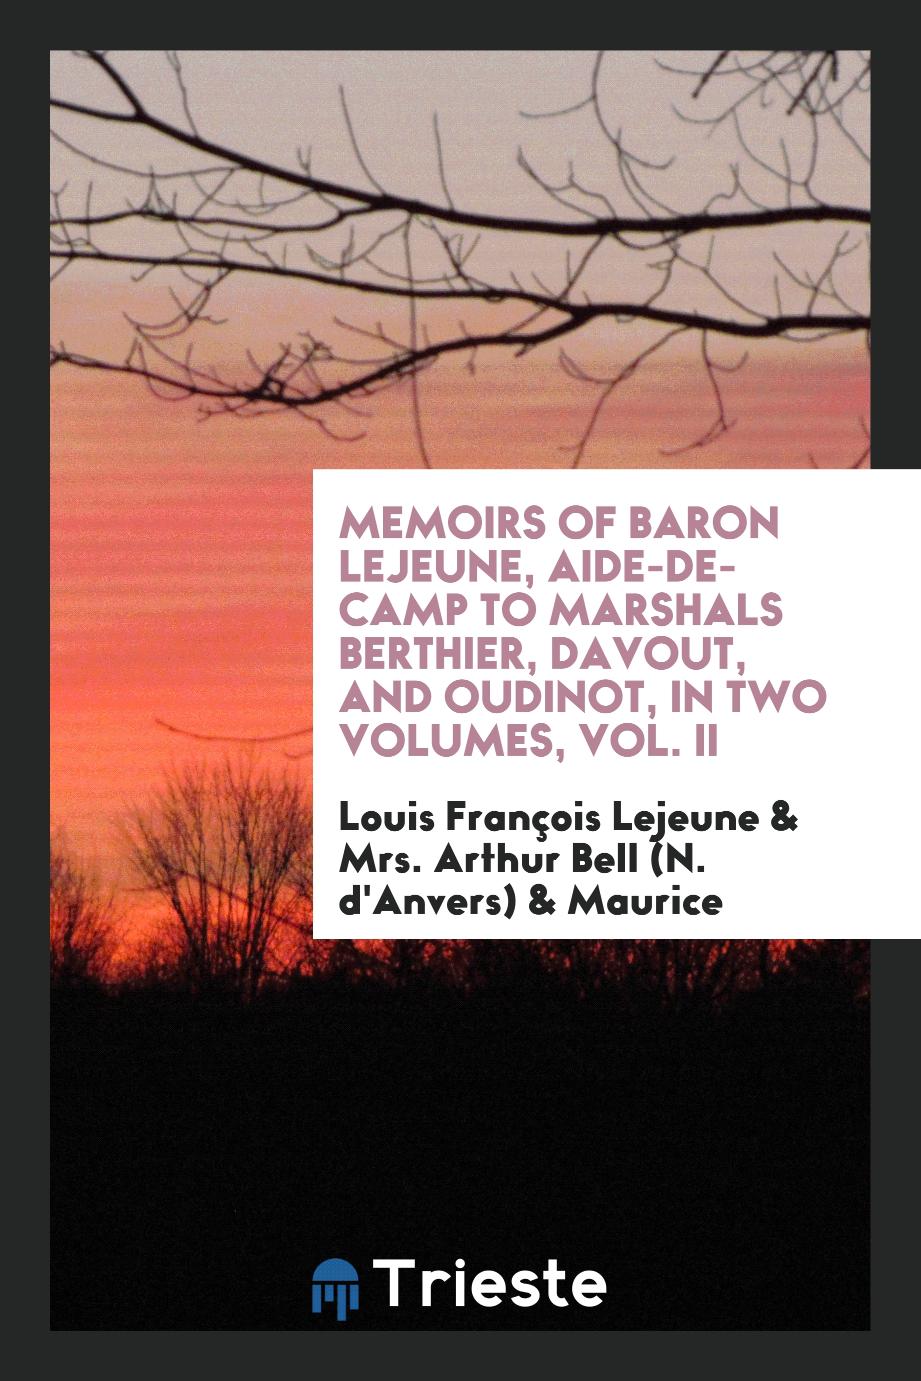 Memoirs of Baron Lejeune, Aide-De-Camp to Marshals Berthier, Davout, and Oudinot, in Two Volumes, Vol. II